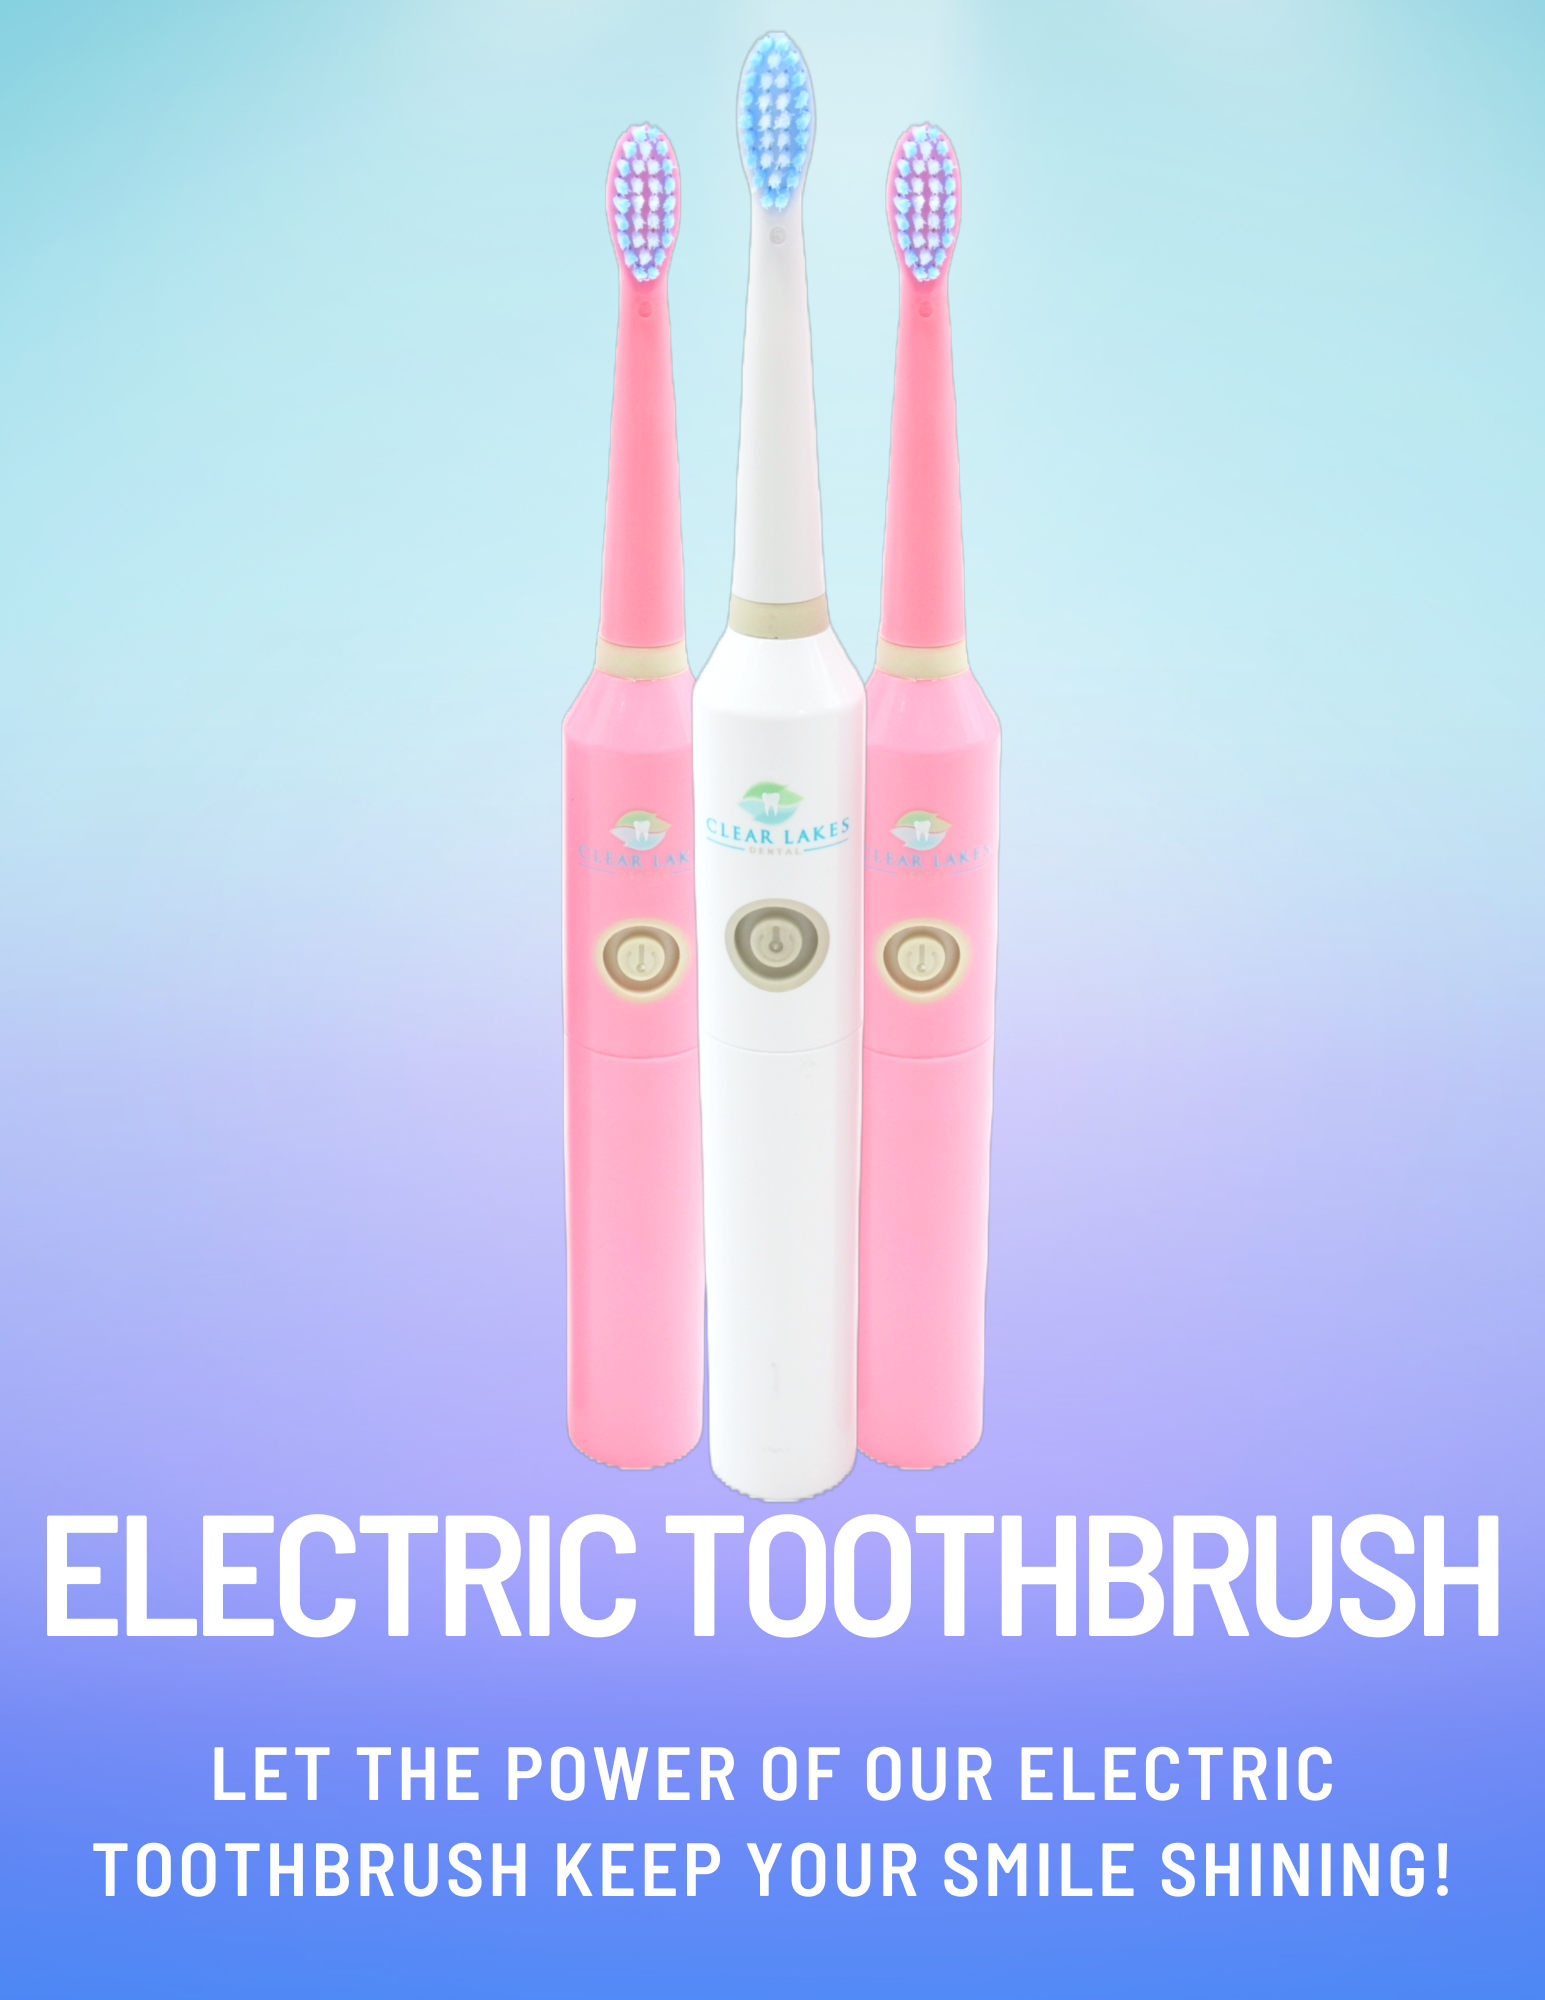 One White Electric Toothbrush and One Pink Electric Toothbrush on a blue and purple background with text below "Electric Toothbrush - Let the Power of Our Electric Toothbrush Keep Your Smile Shining!"